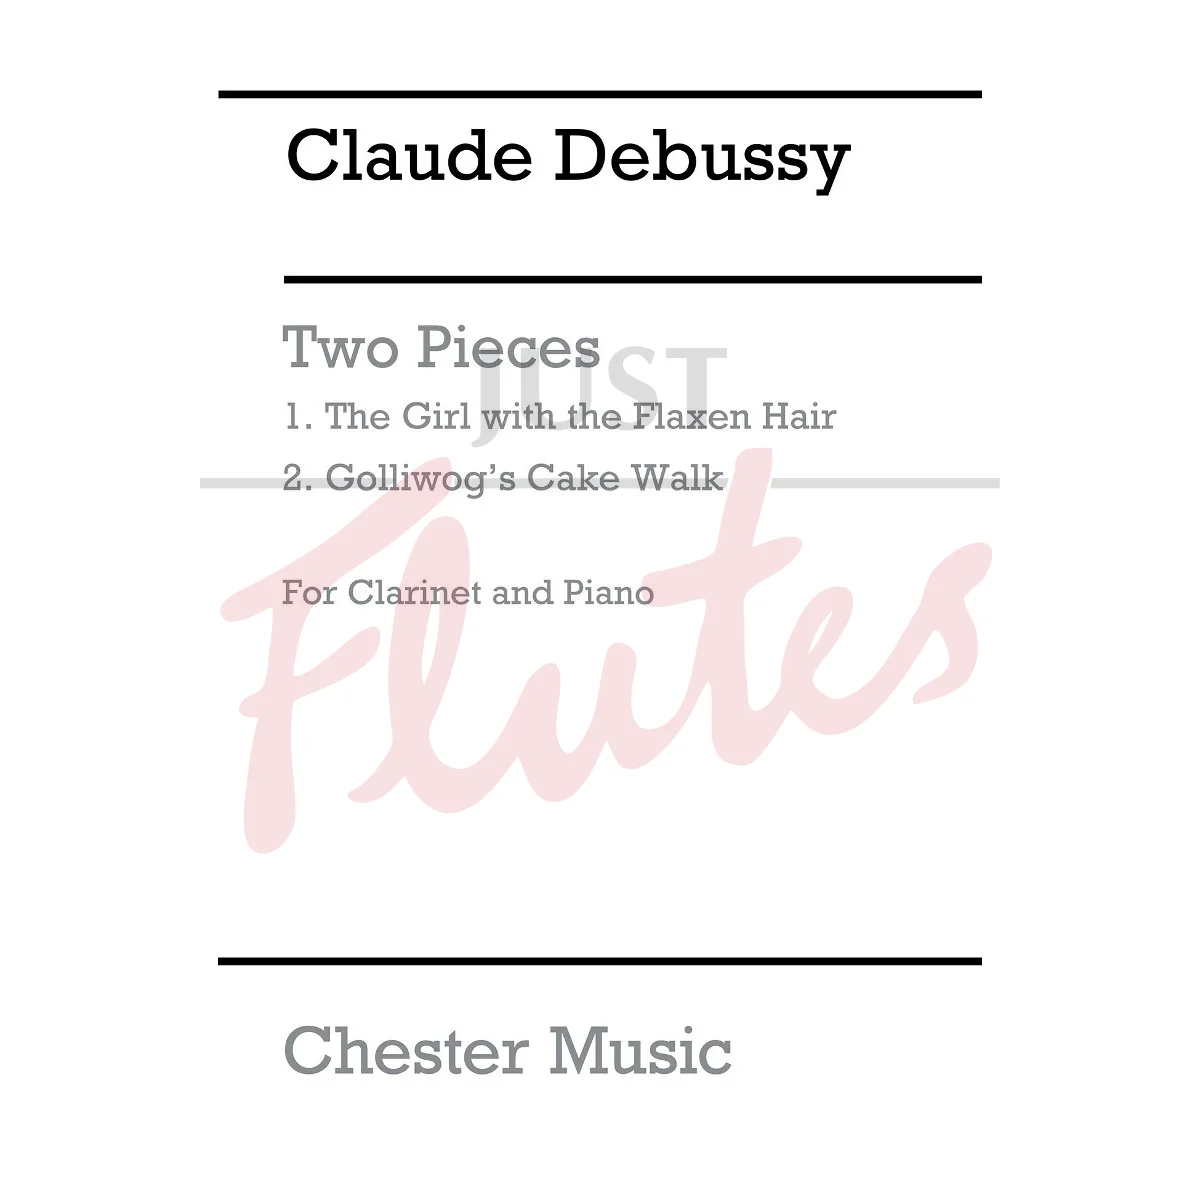 Two Pieces for Clarinet and Piano